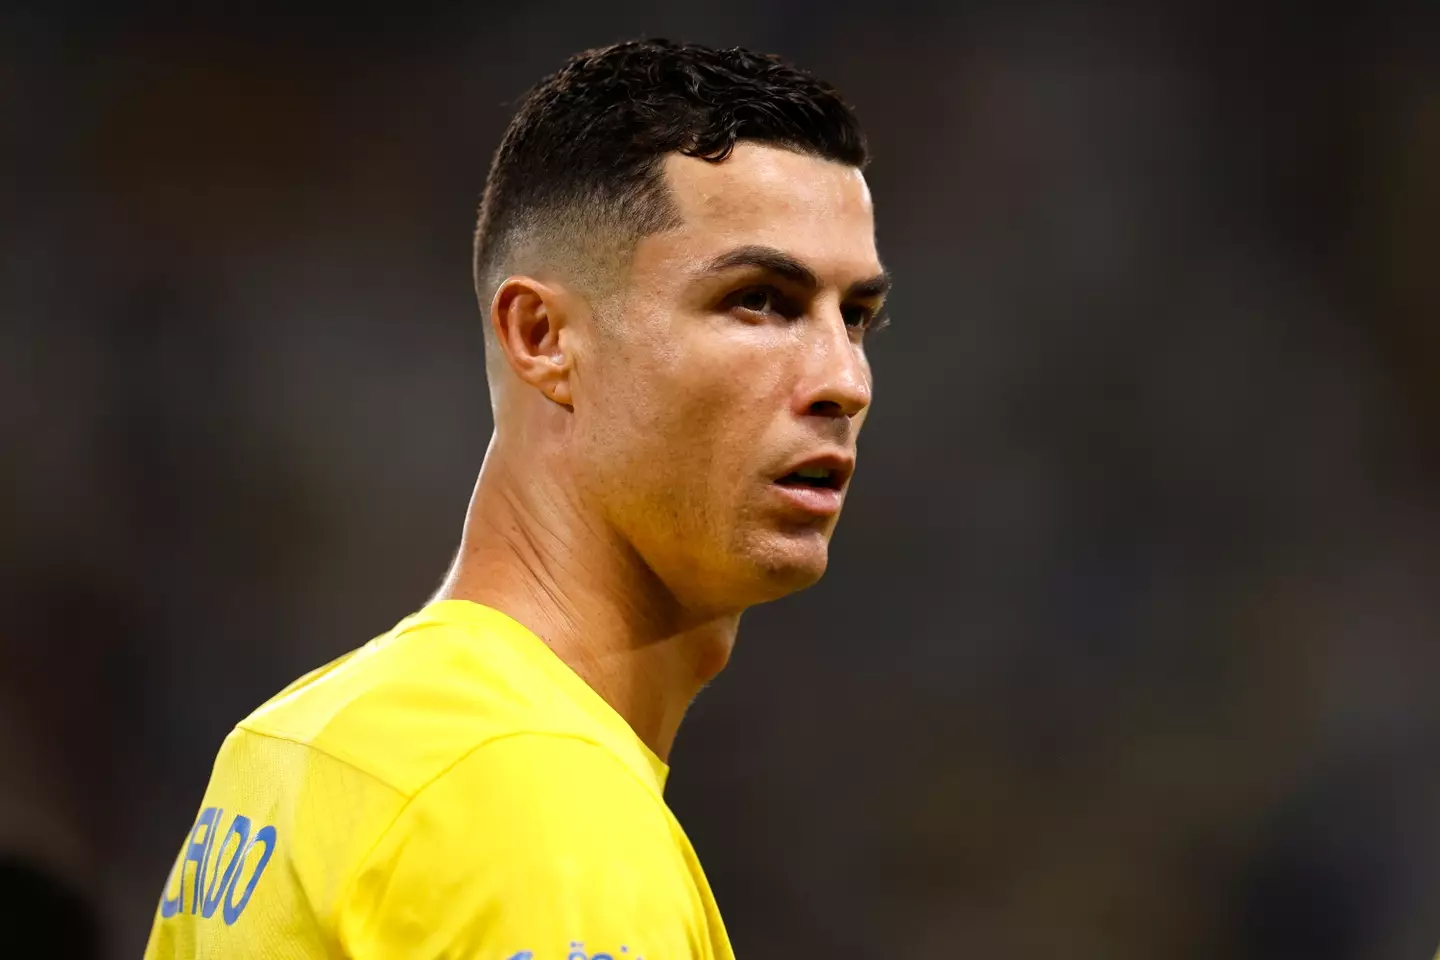 Cristiano Ronaldo could be facing a sentence of '99 lashes for adultery'.